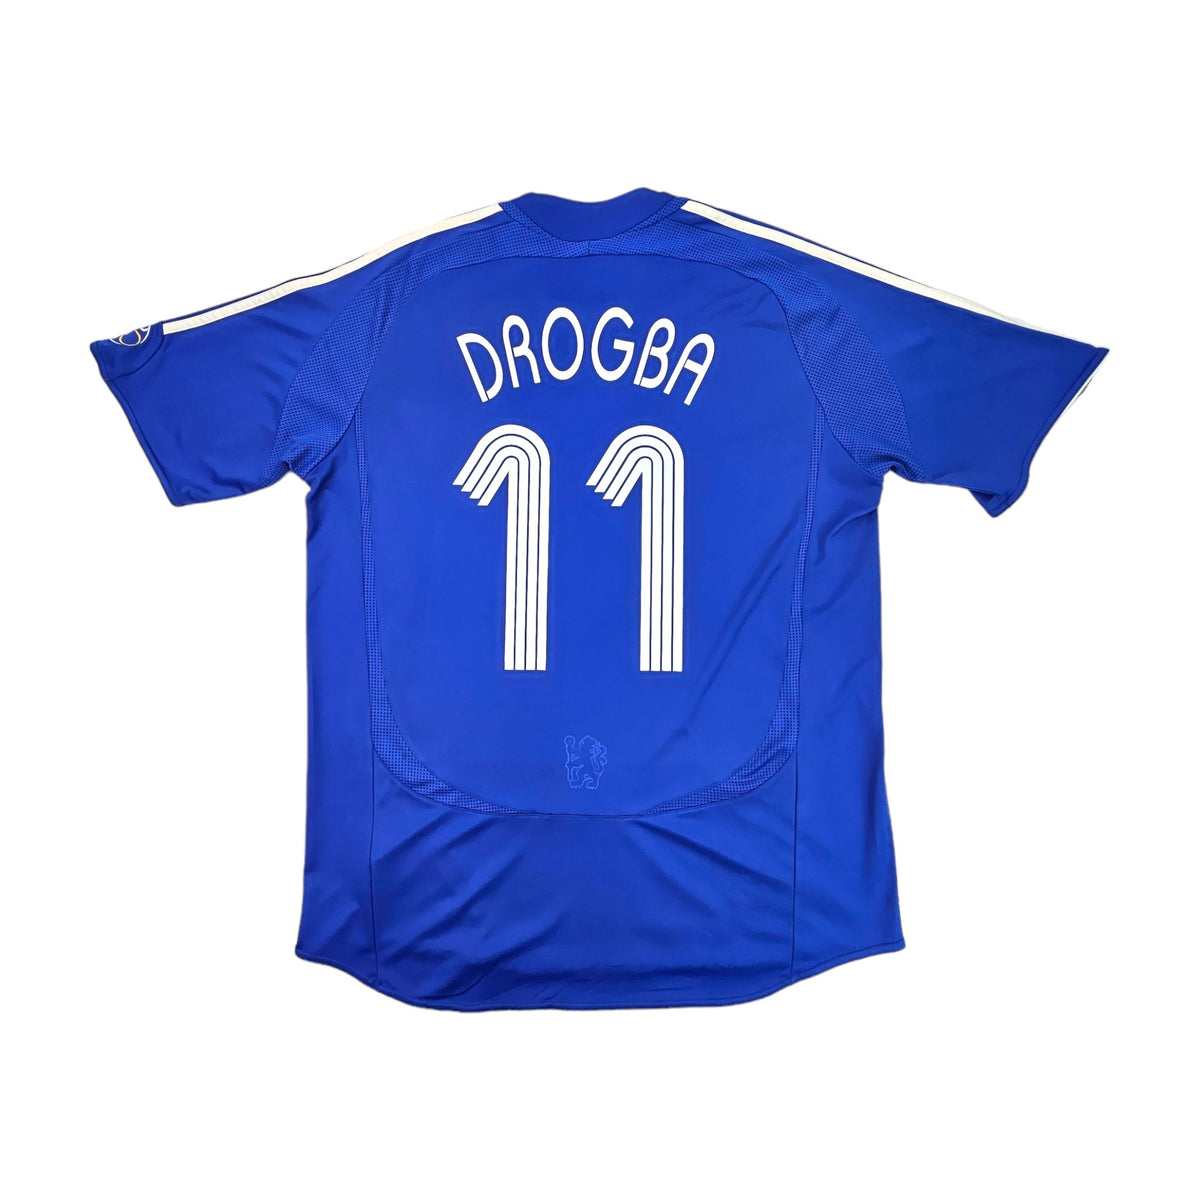 Chelsea Football Club - You can pre-order your Drogba home shirt at